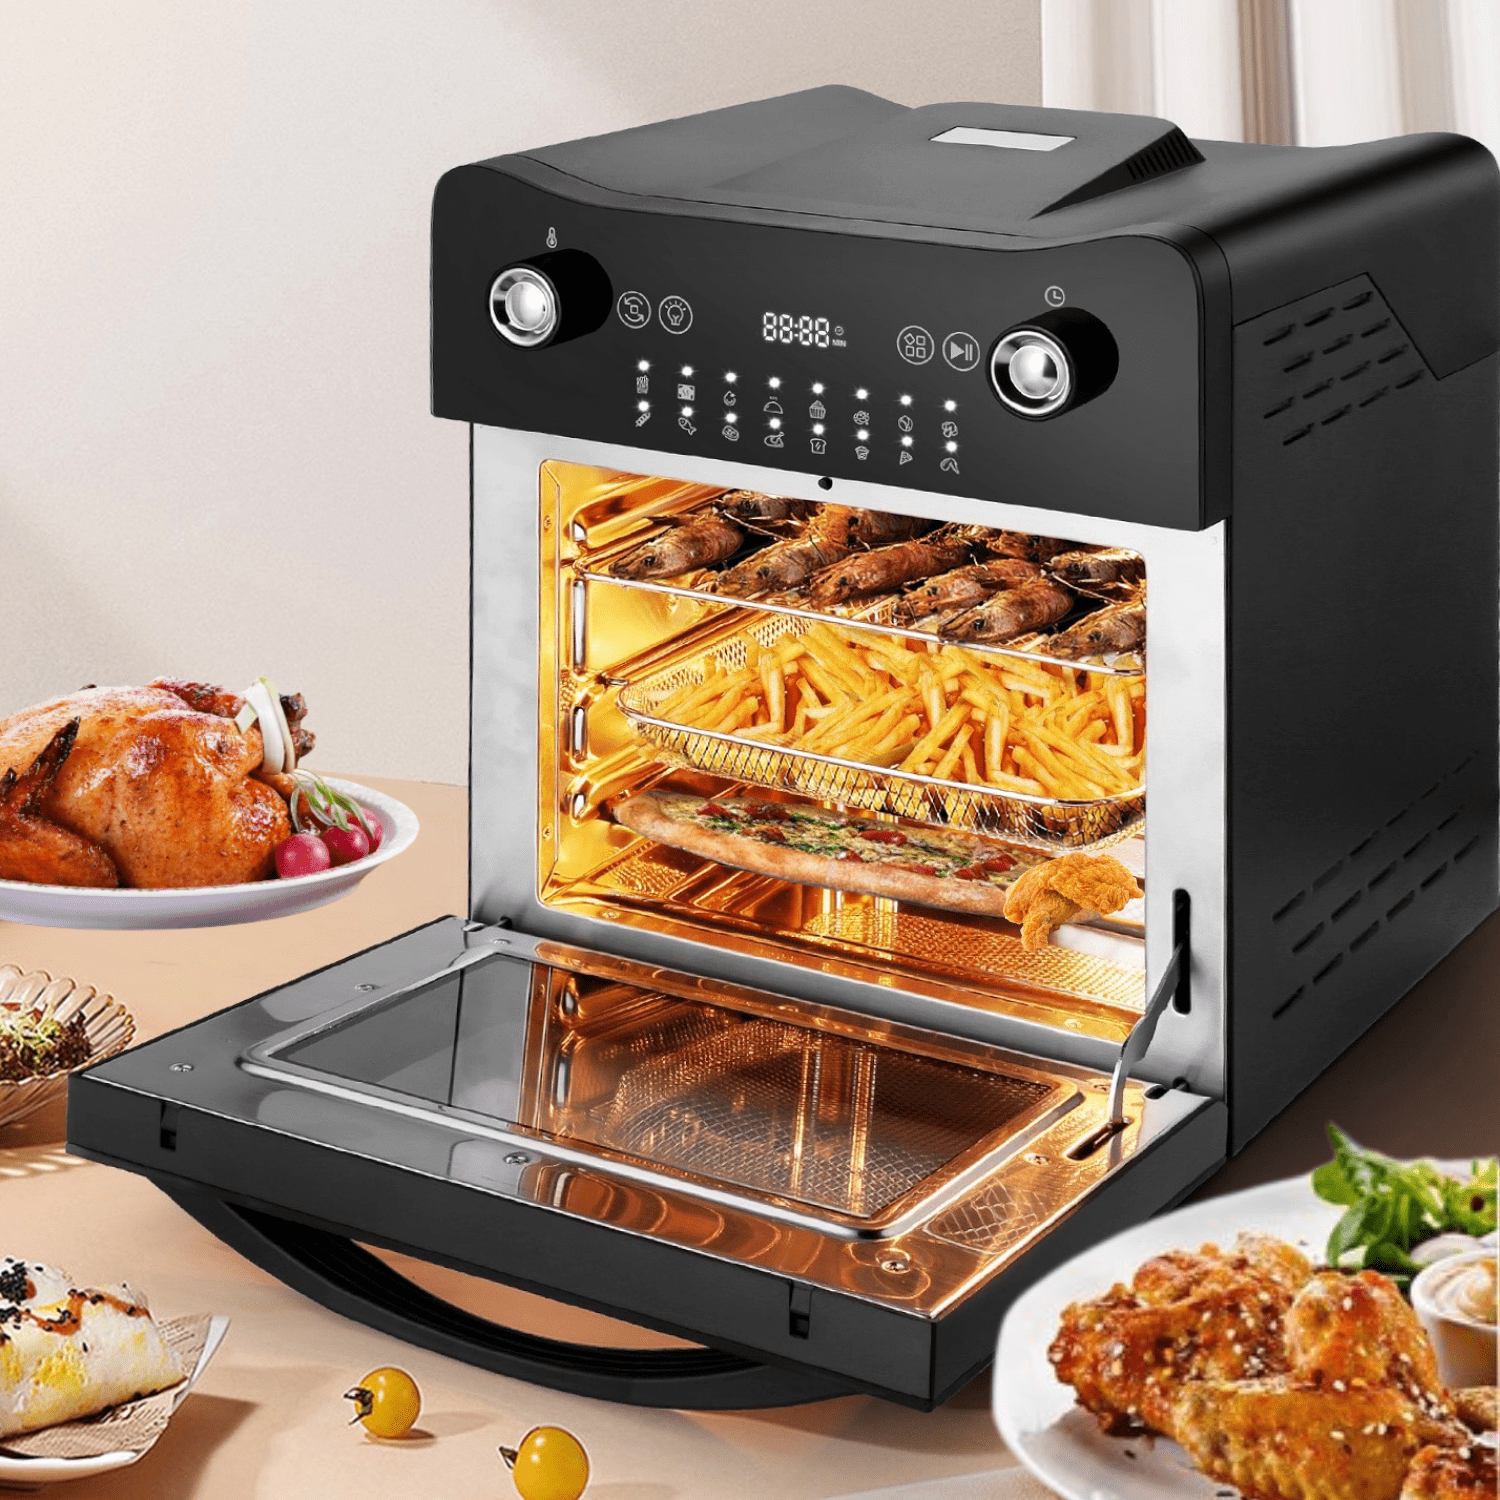 2.6Qt White Recipe Guide Auto Shut Off Feature Oven Cooker with Temperature Control Dash DCAF200GBWH02 Tasti-Crisp Electric Air Fryer Non Stick Fry Basket Renewed 